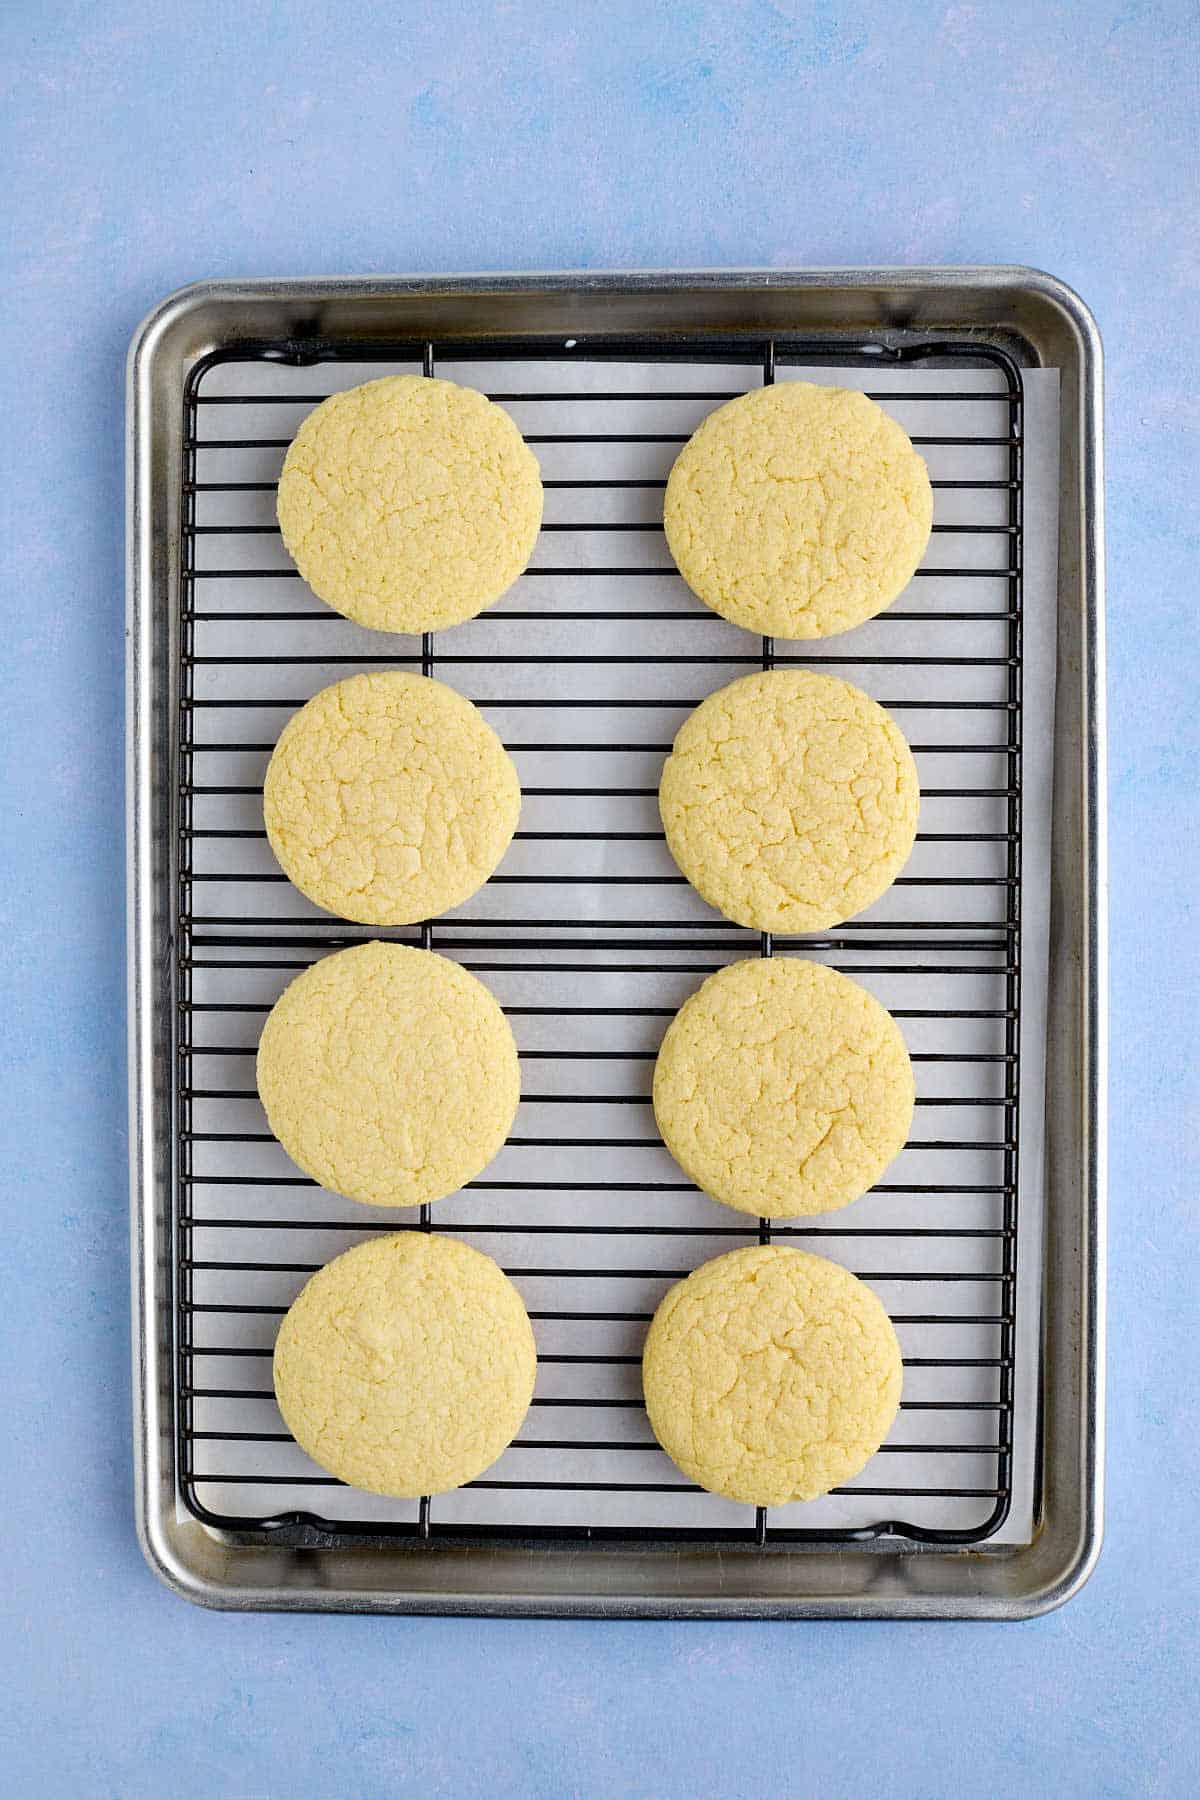 Baked cookies on a cooling rack with parchment paper underneath to catch and glaze spills.